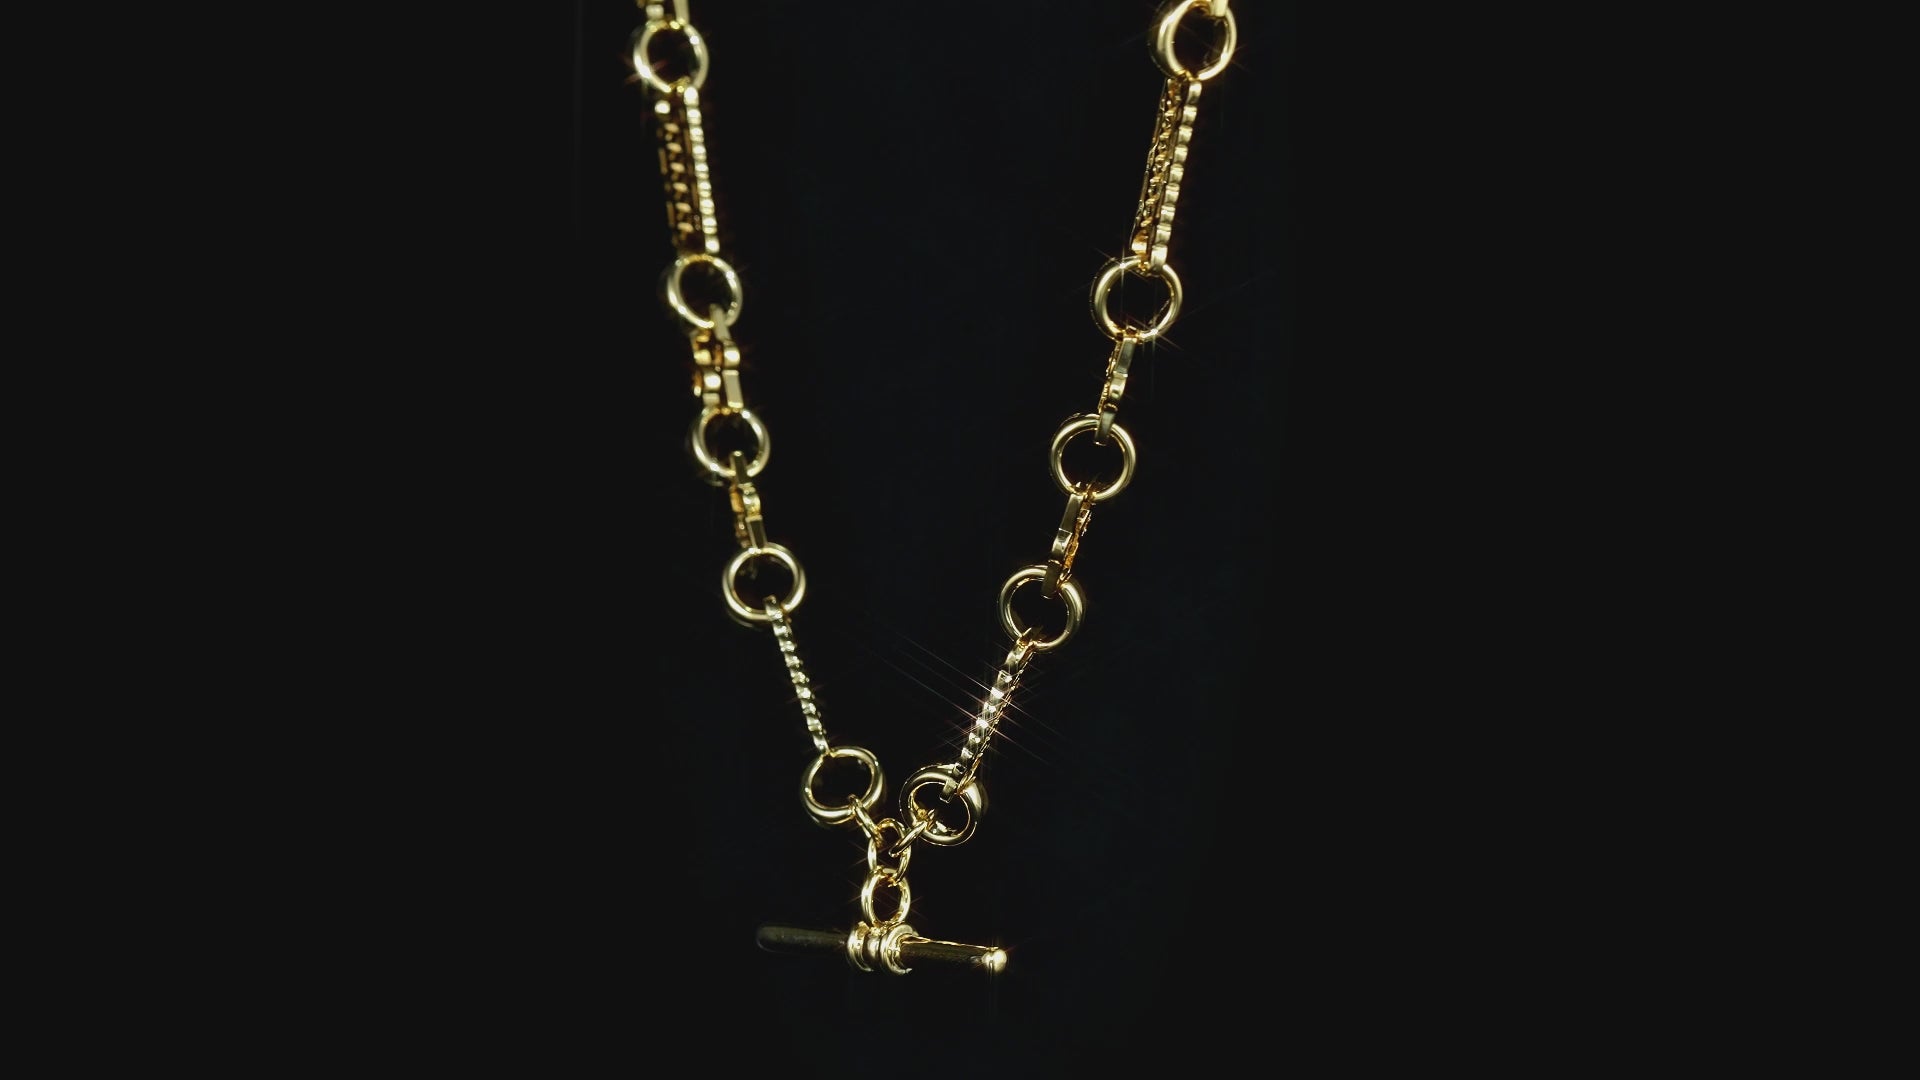 The Chapel Jewellers Ltd - 9ct Pre-owned Stars and Bars Chain (Chain &  Bracelet together) 72.4g, 28